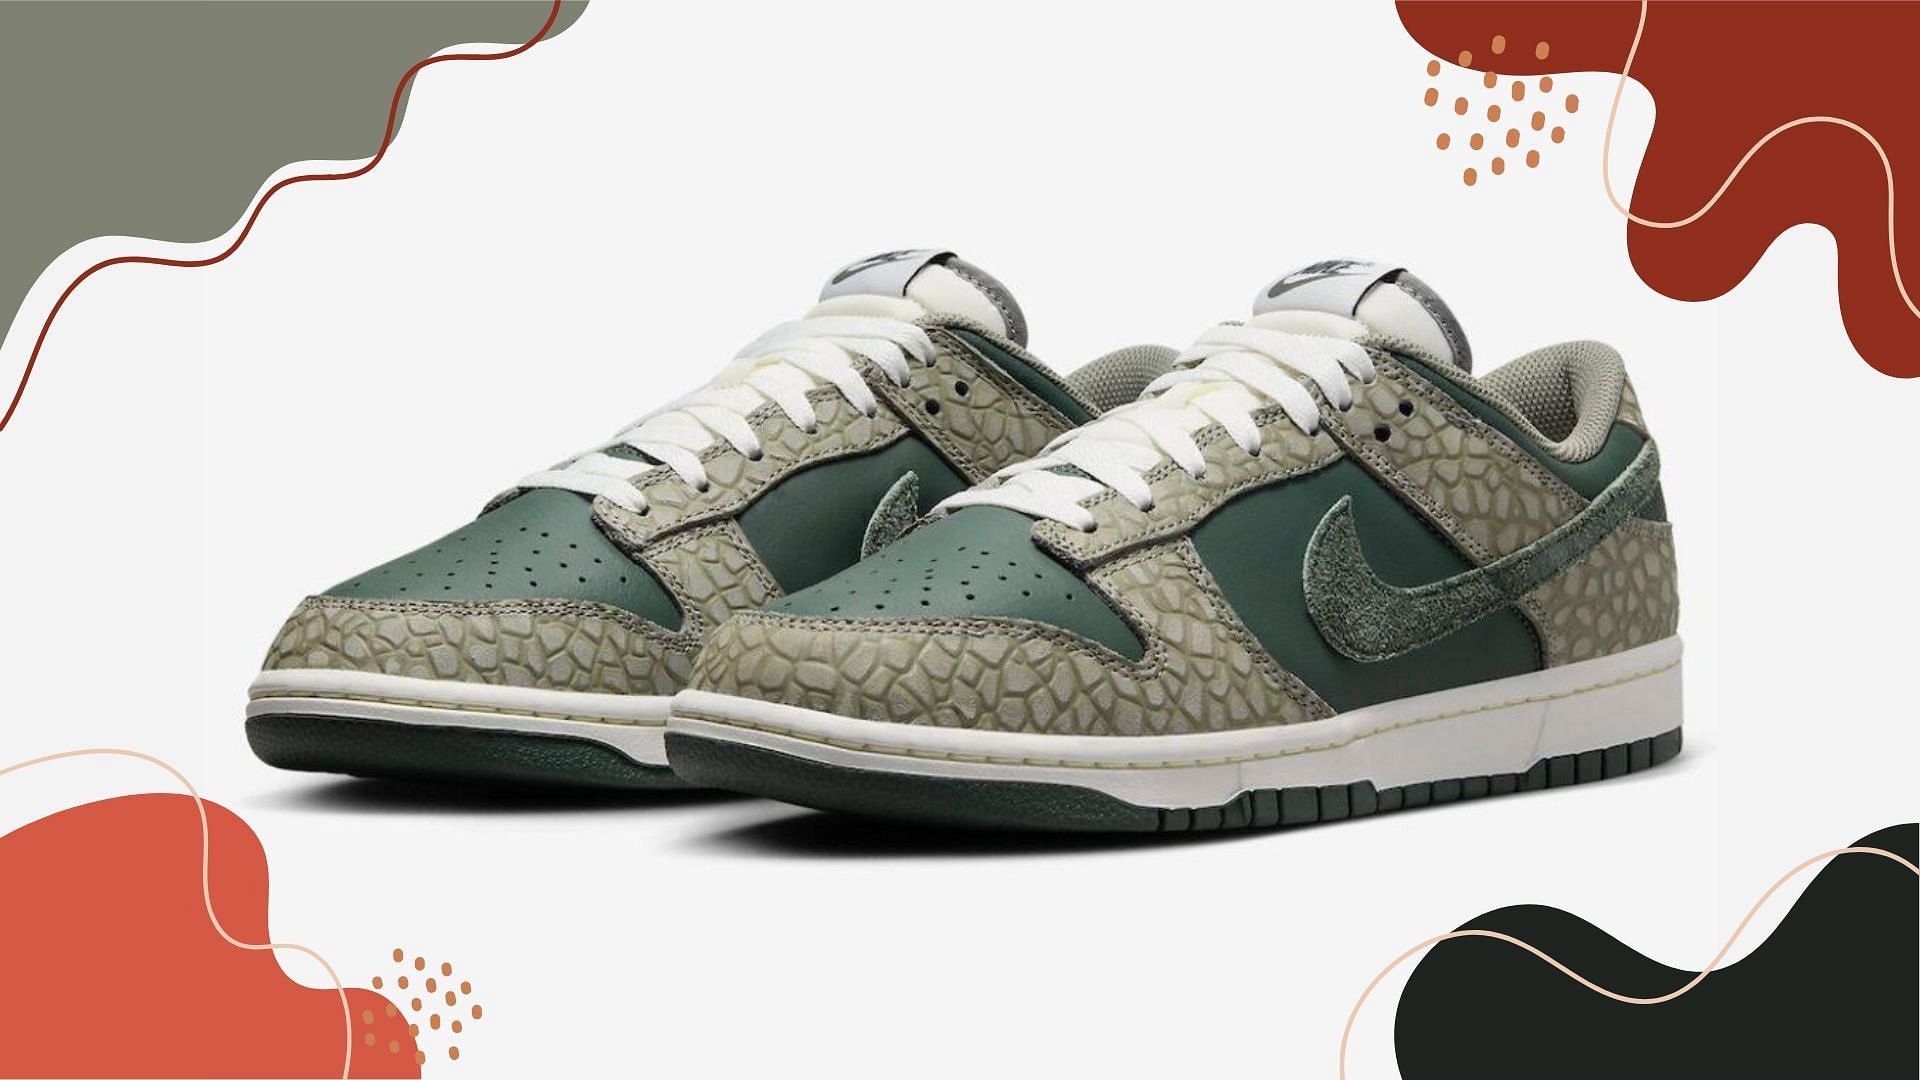 Nike Dunk Low sneakers (Image via YouTube/@ragnoupdates)